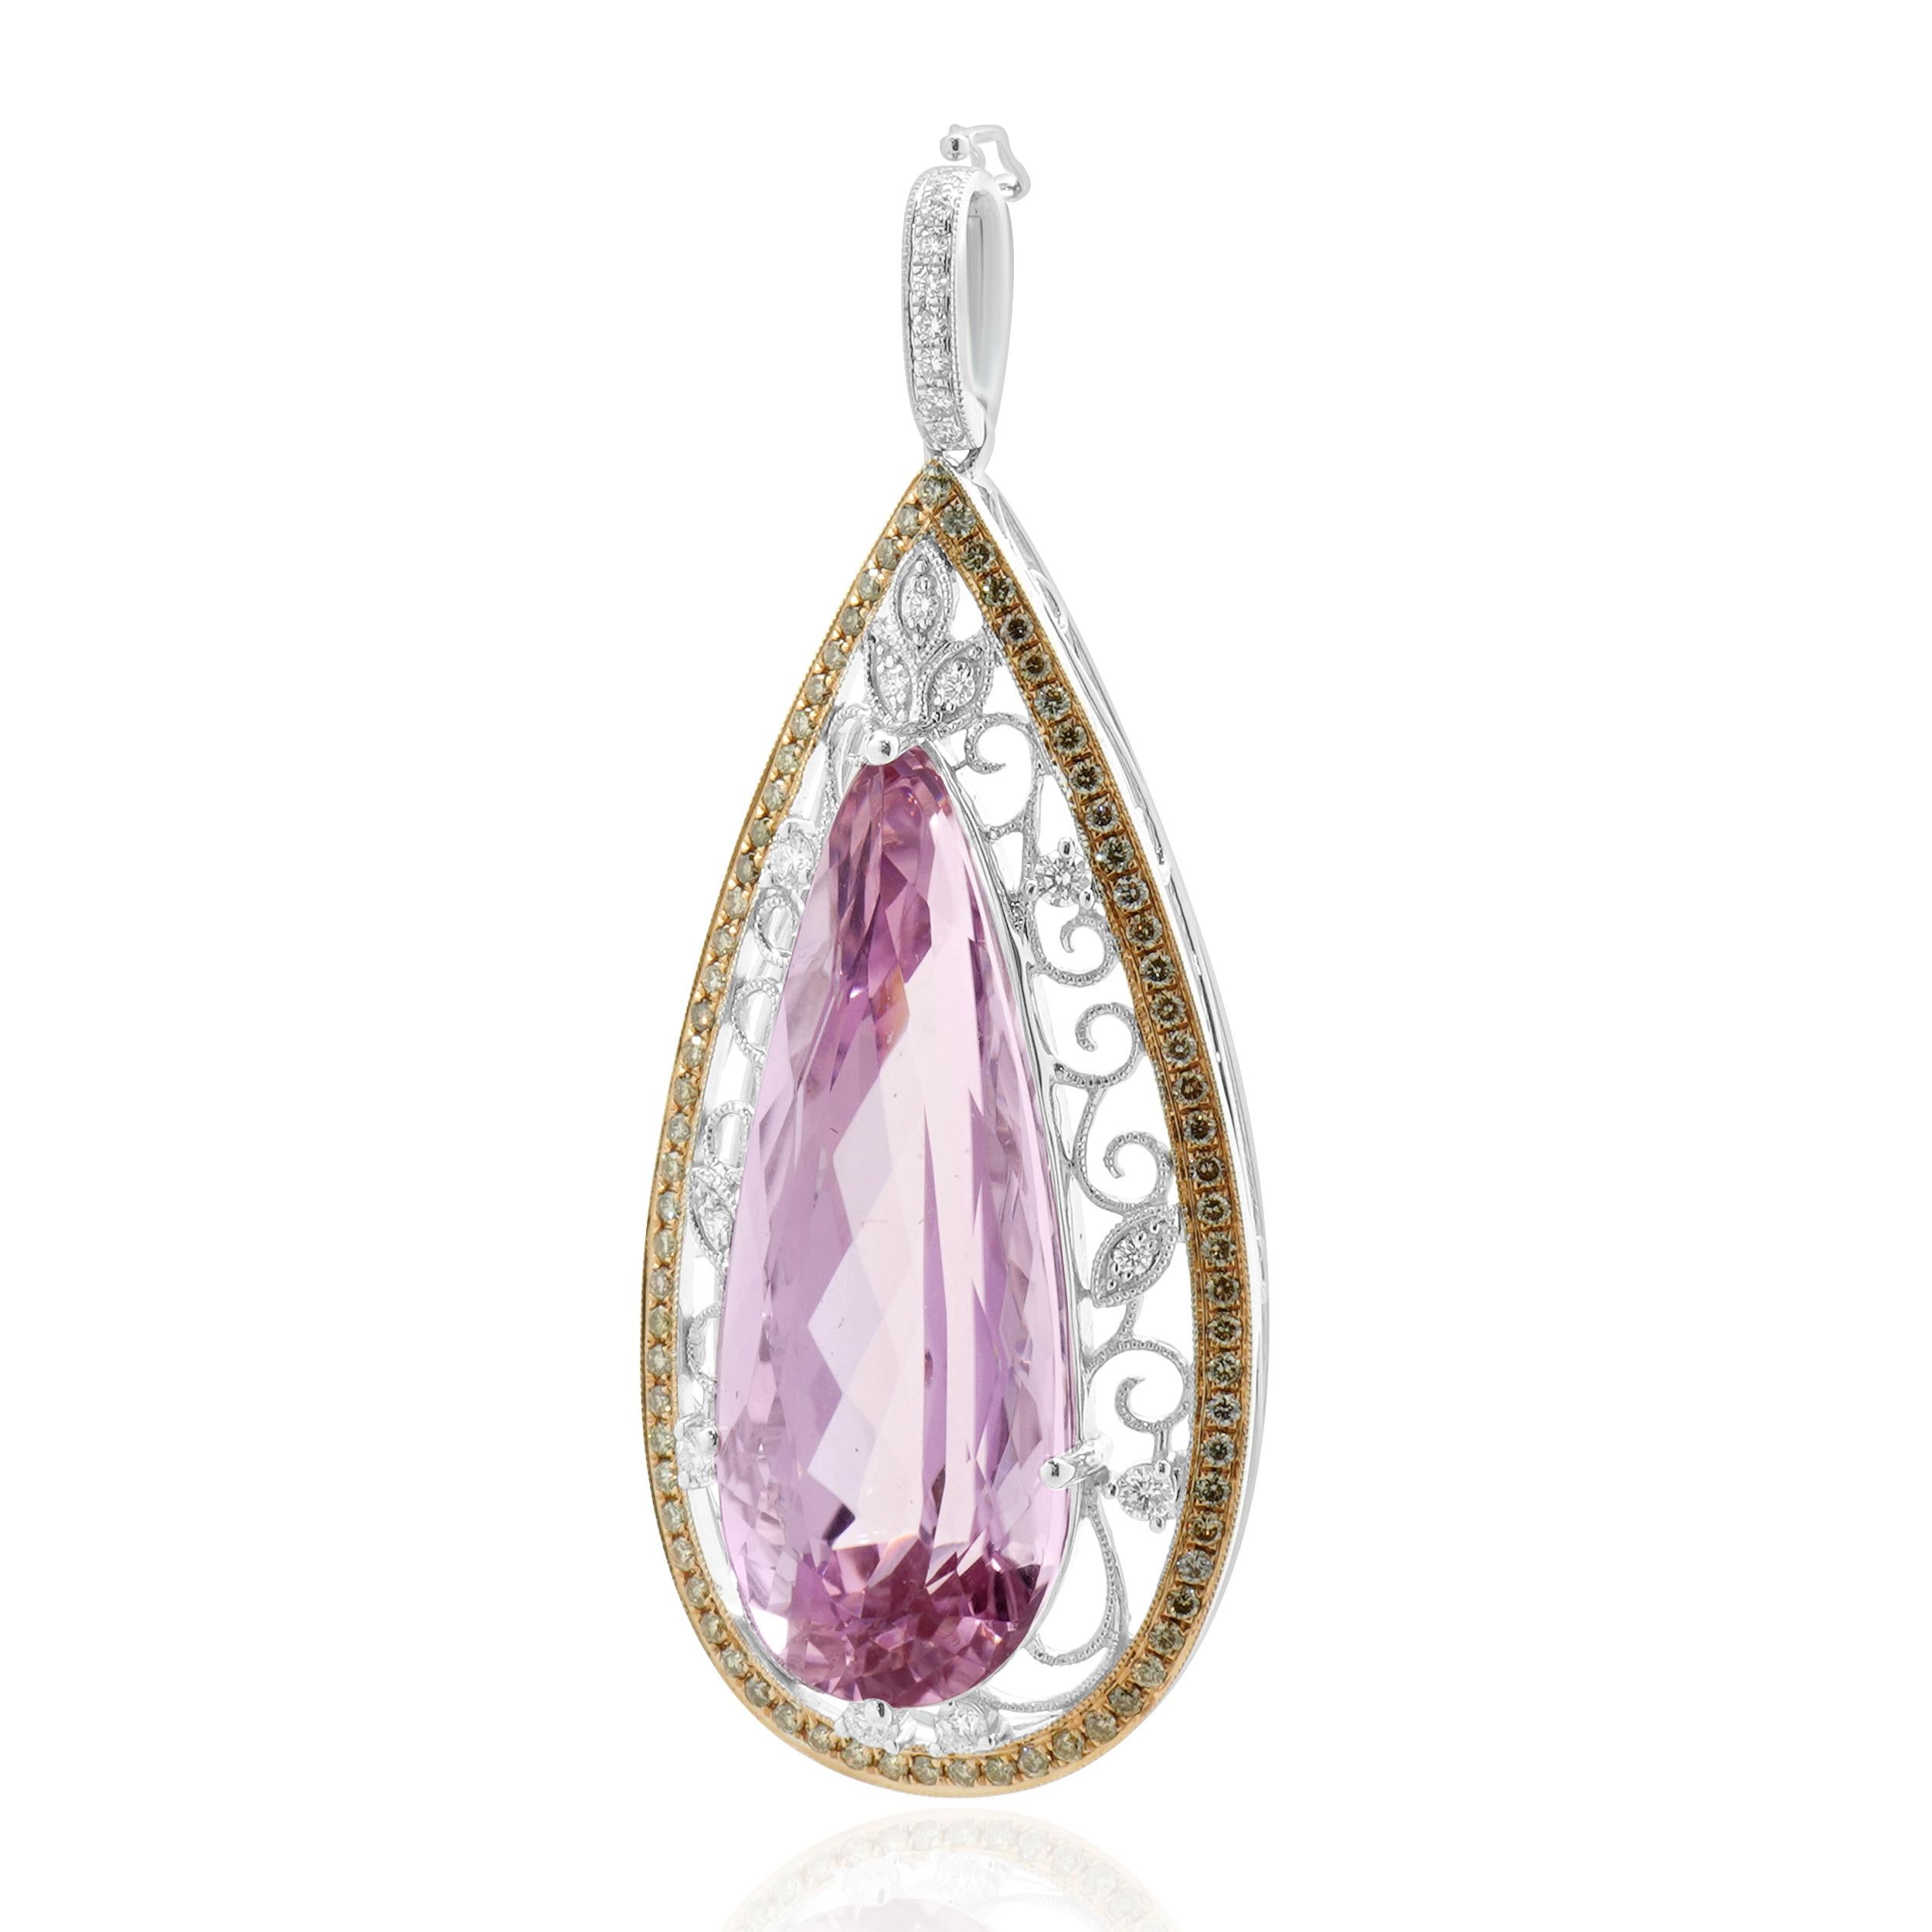 Designer: custom design
Material: 18K two tone white and rose gold
Diamonds: 0.97cttw
Color: H
Clarity: SI1
Kunzite : 30.76cttw
Weight: 14.86 grams
